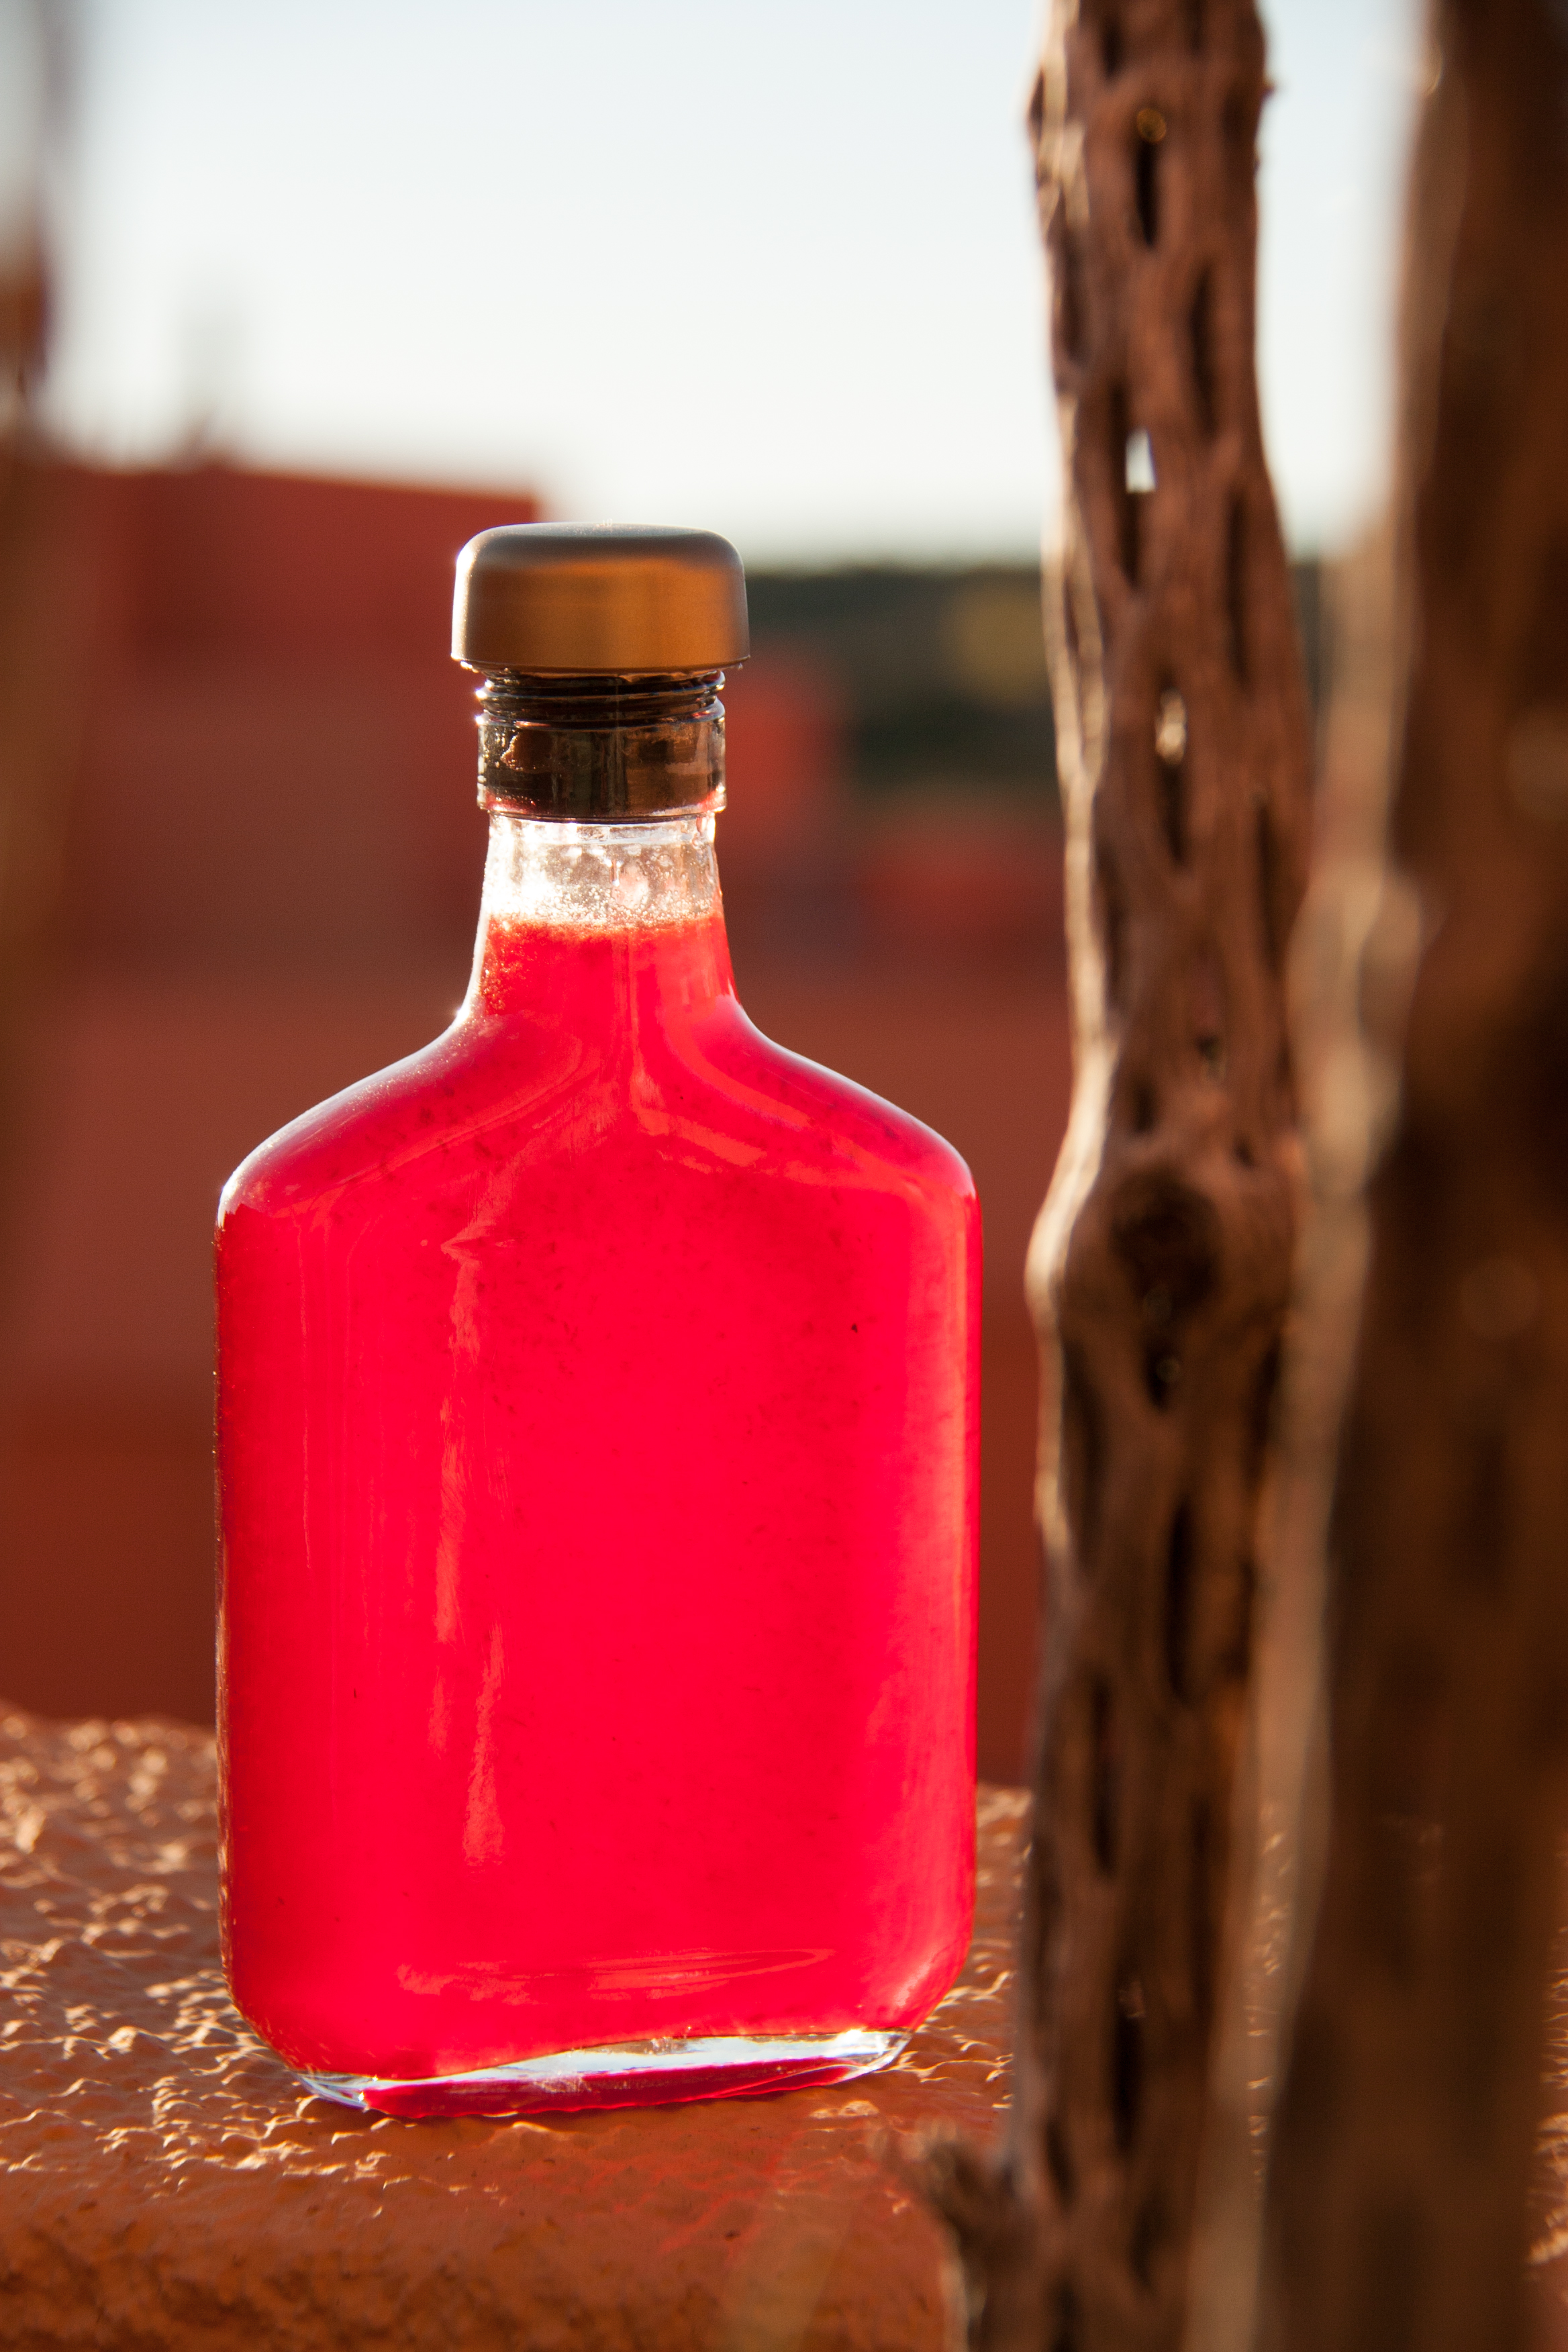 Prickly Pear Syrup Recipe (and a How-to Video!)